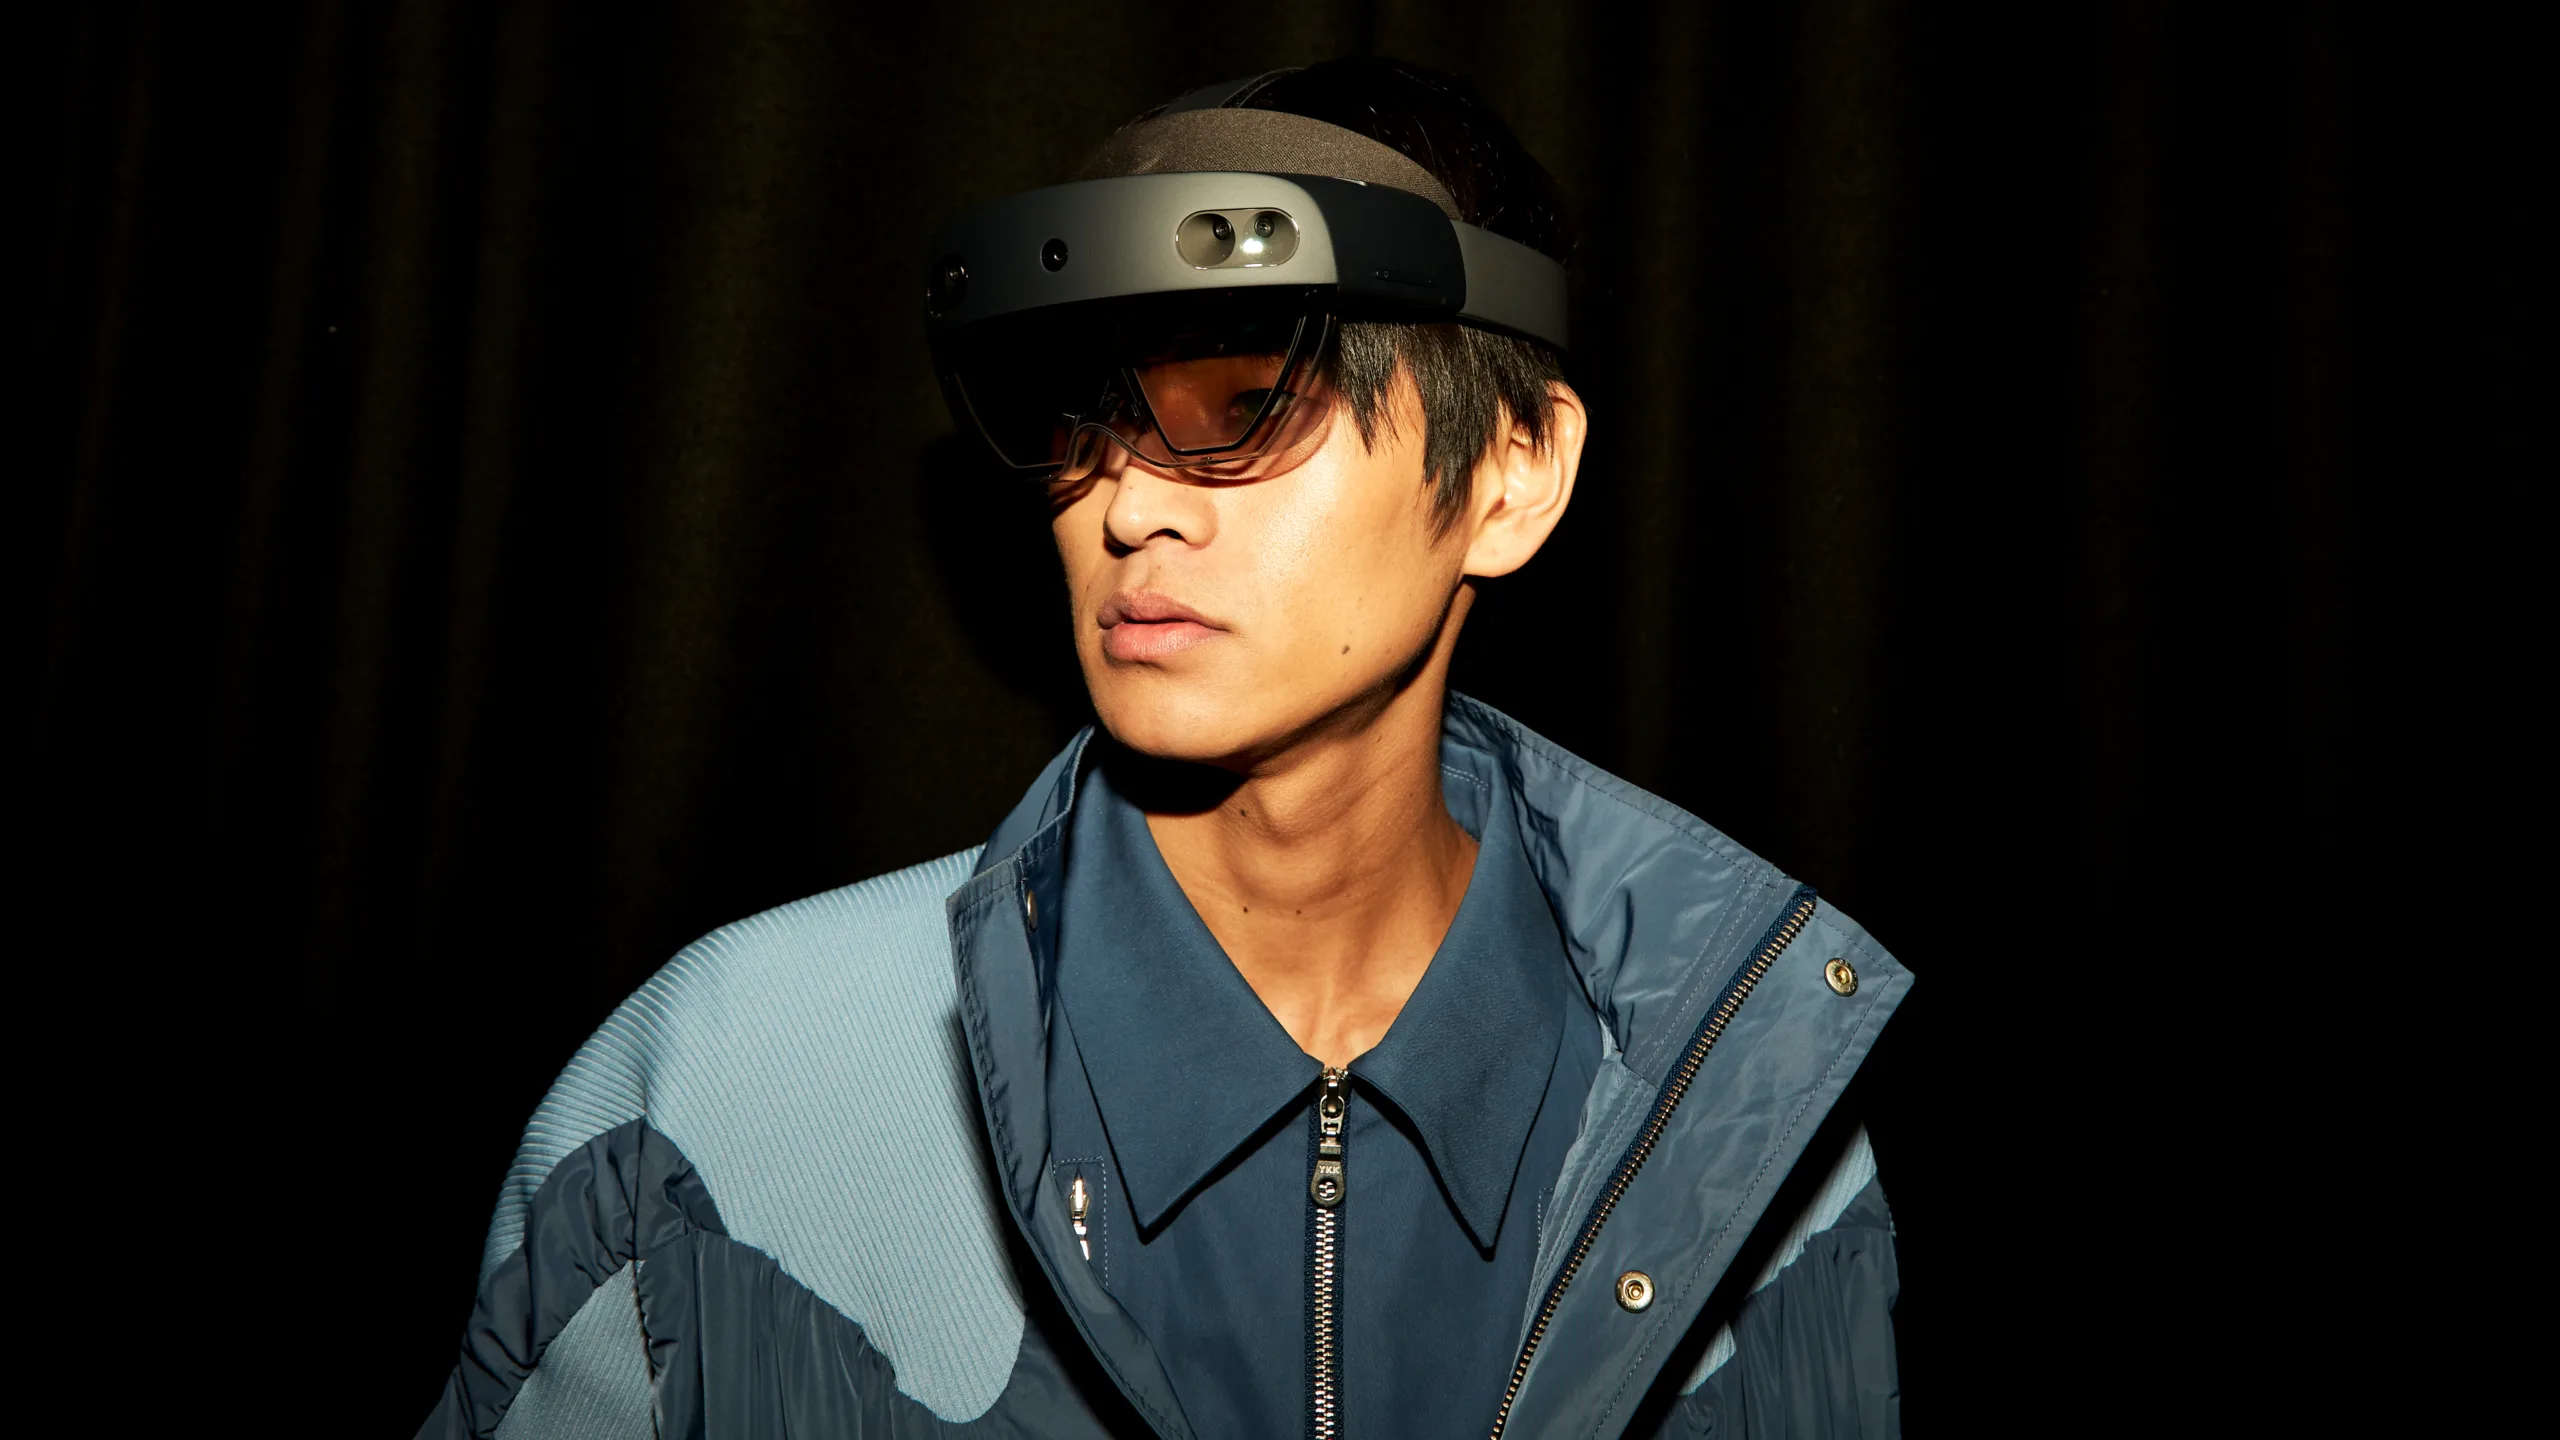 Fashion creator wearing a HoloLens, which allows users to experience mixed reality fashion shows from wherever they are